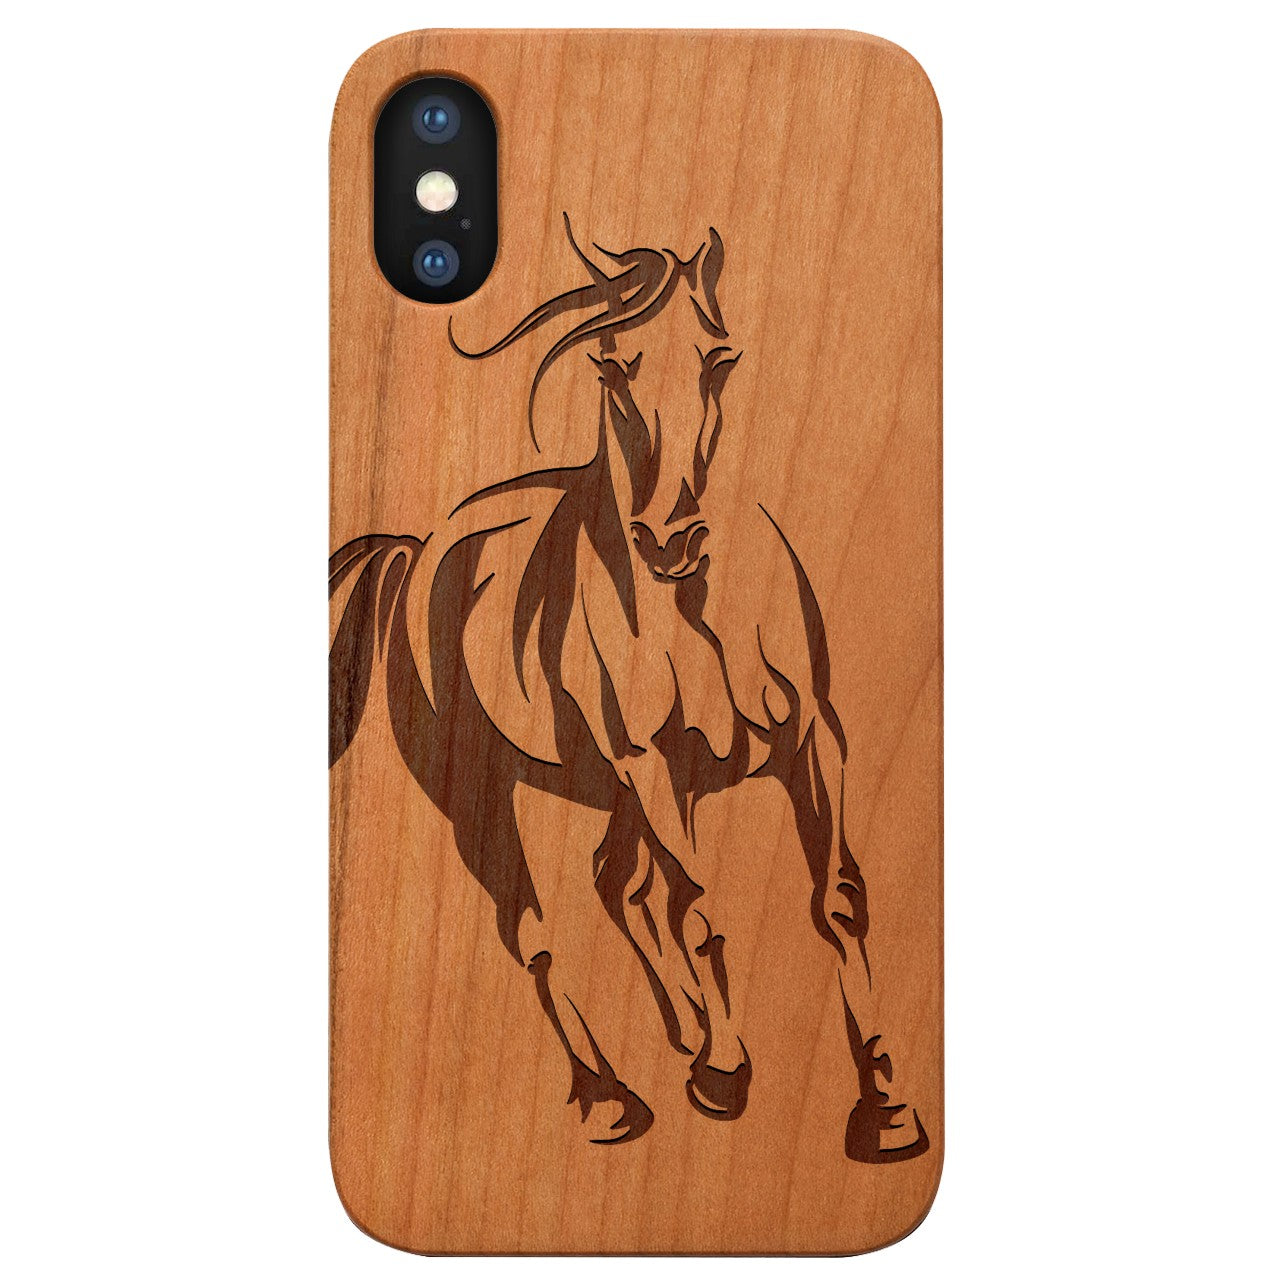  Horse 1 - Engraved - Wooden Phone Case - IPhone 13 Models